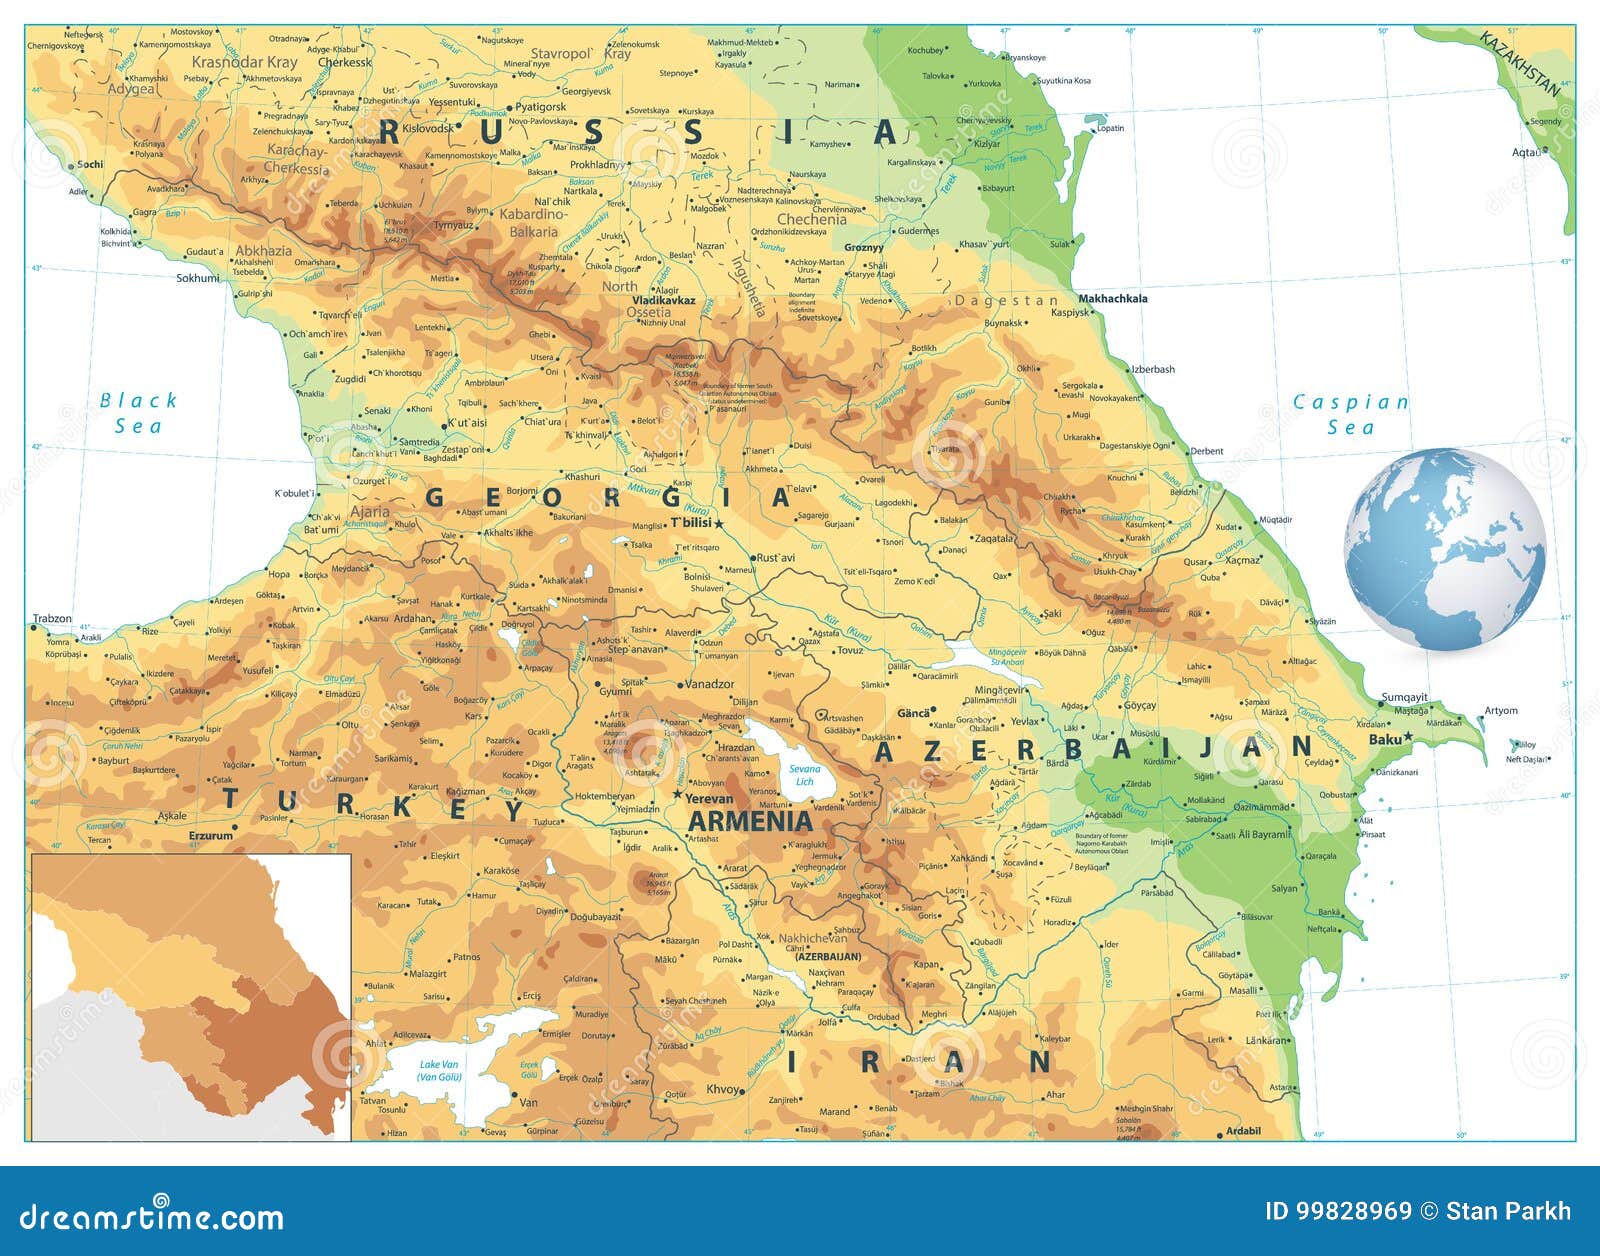 Caucasus Physical Map Isolated On White. No Text Vector Illustration ...